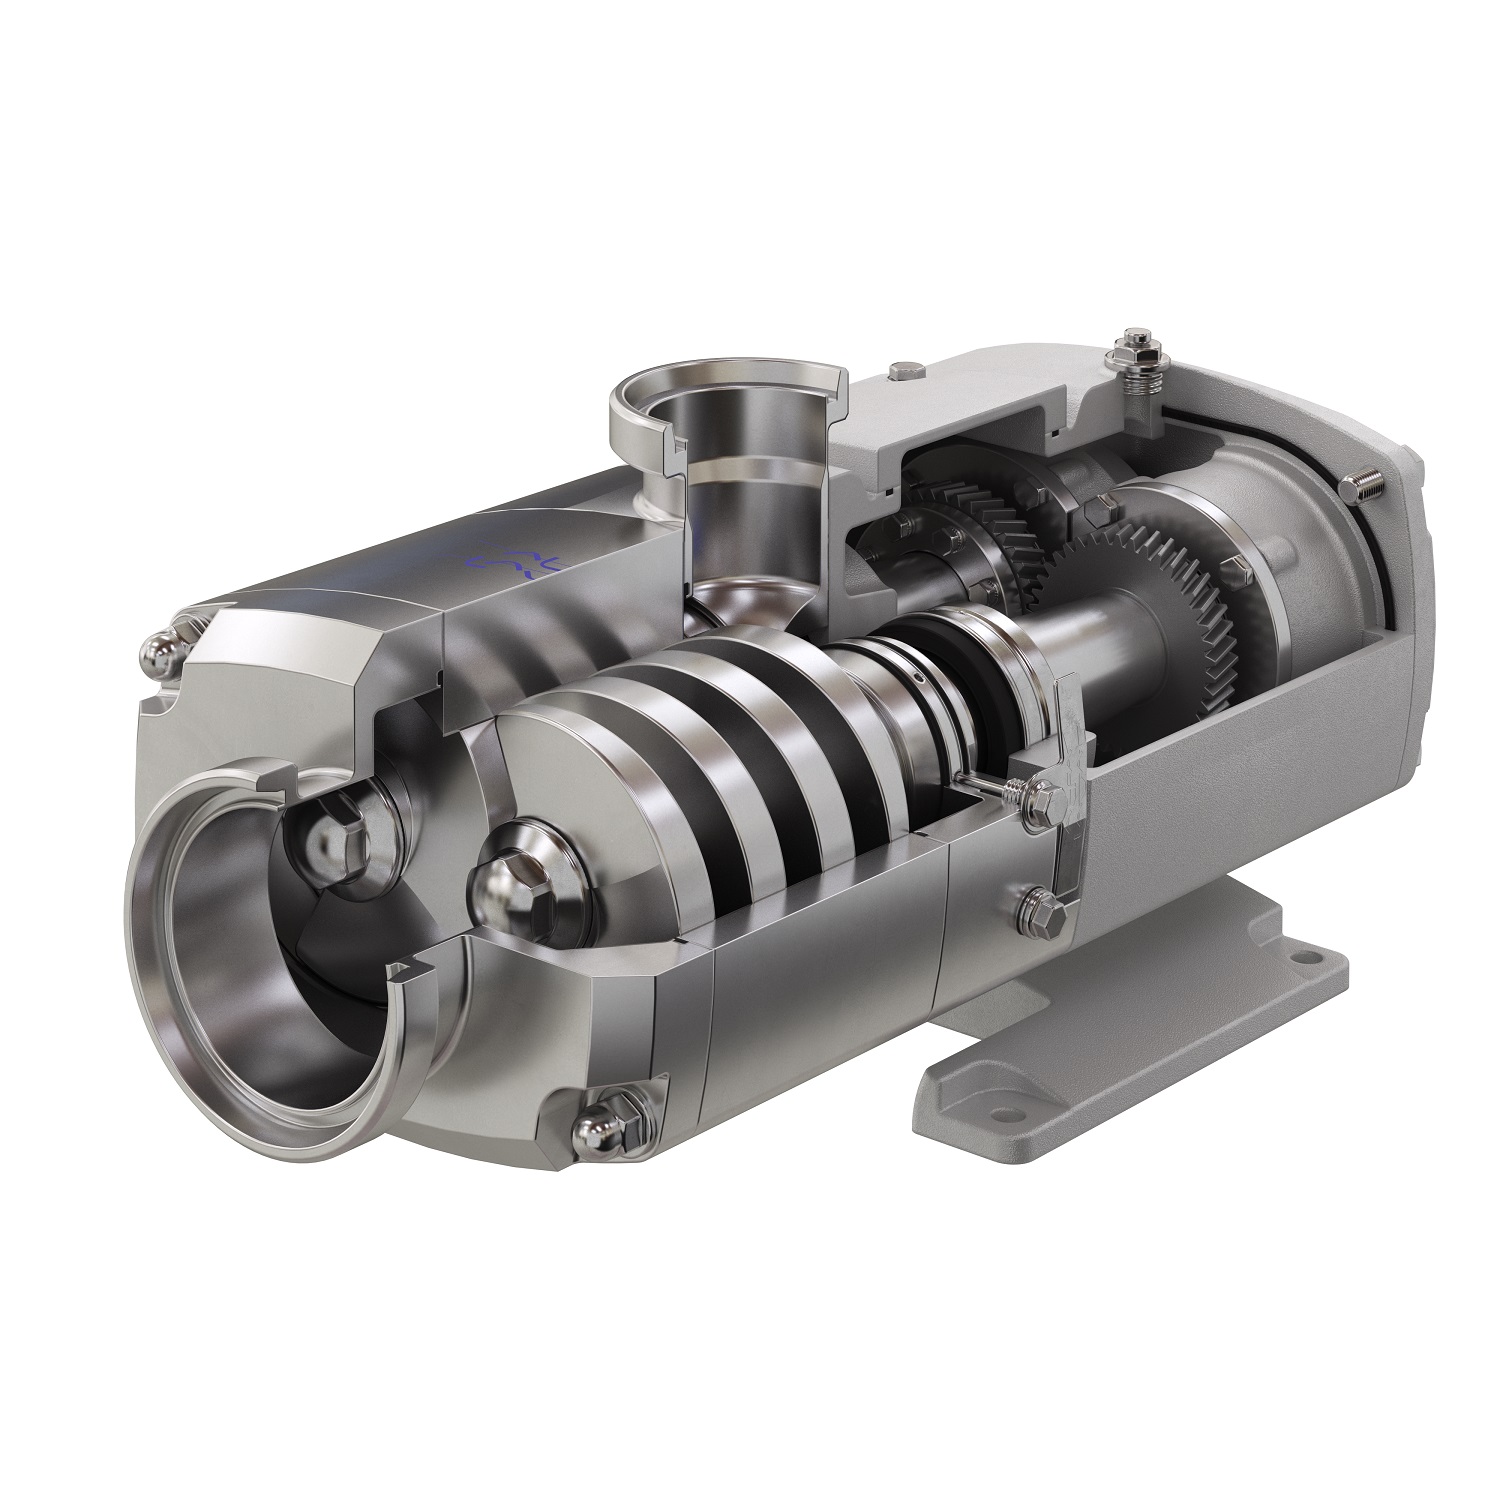 The new twin screw pump combines the capabilities of a positive displacement and a centrifugal pump.